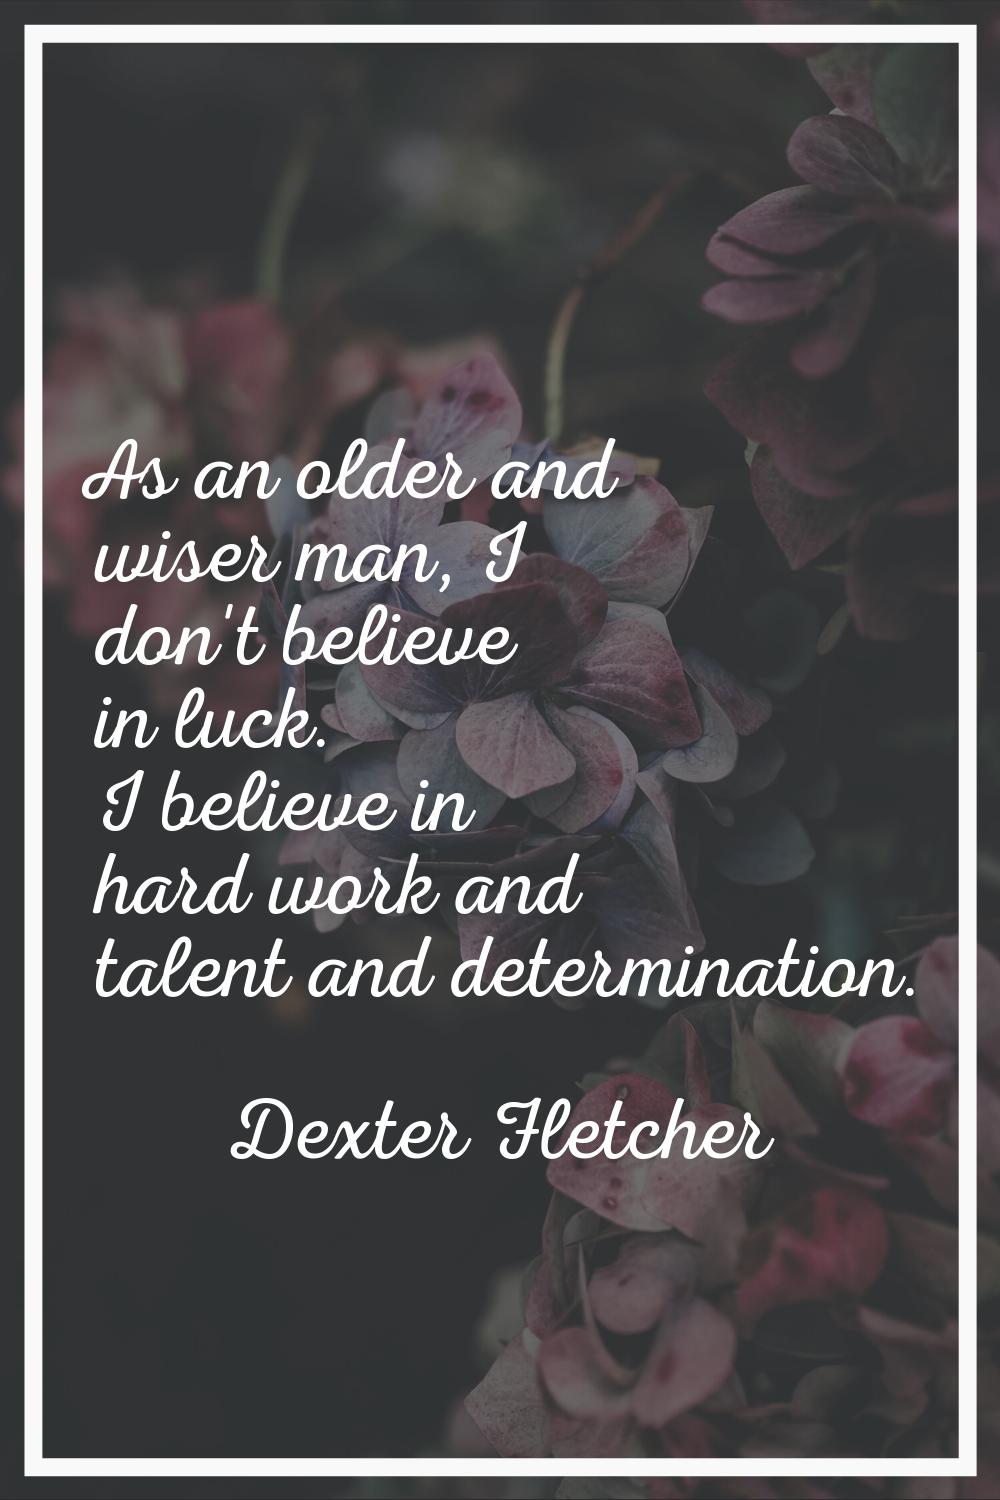 As an older and wiser man, I don't believe in luck. I believe in hard work and talent and determina